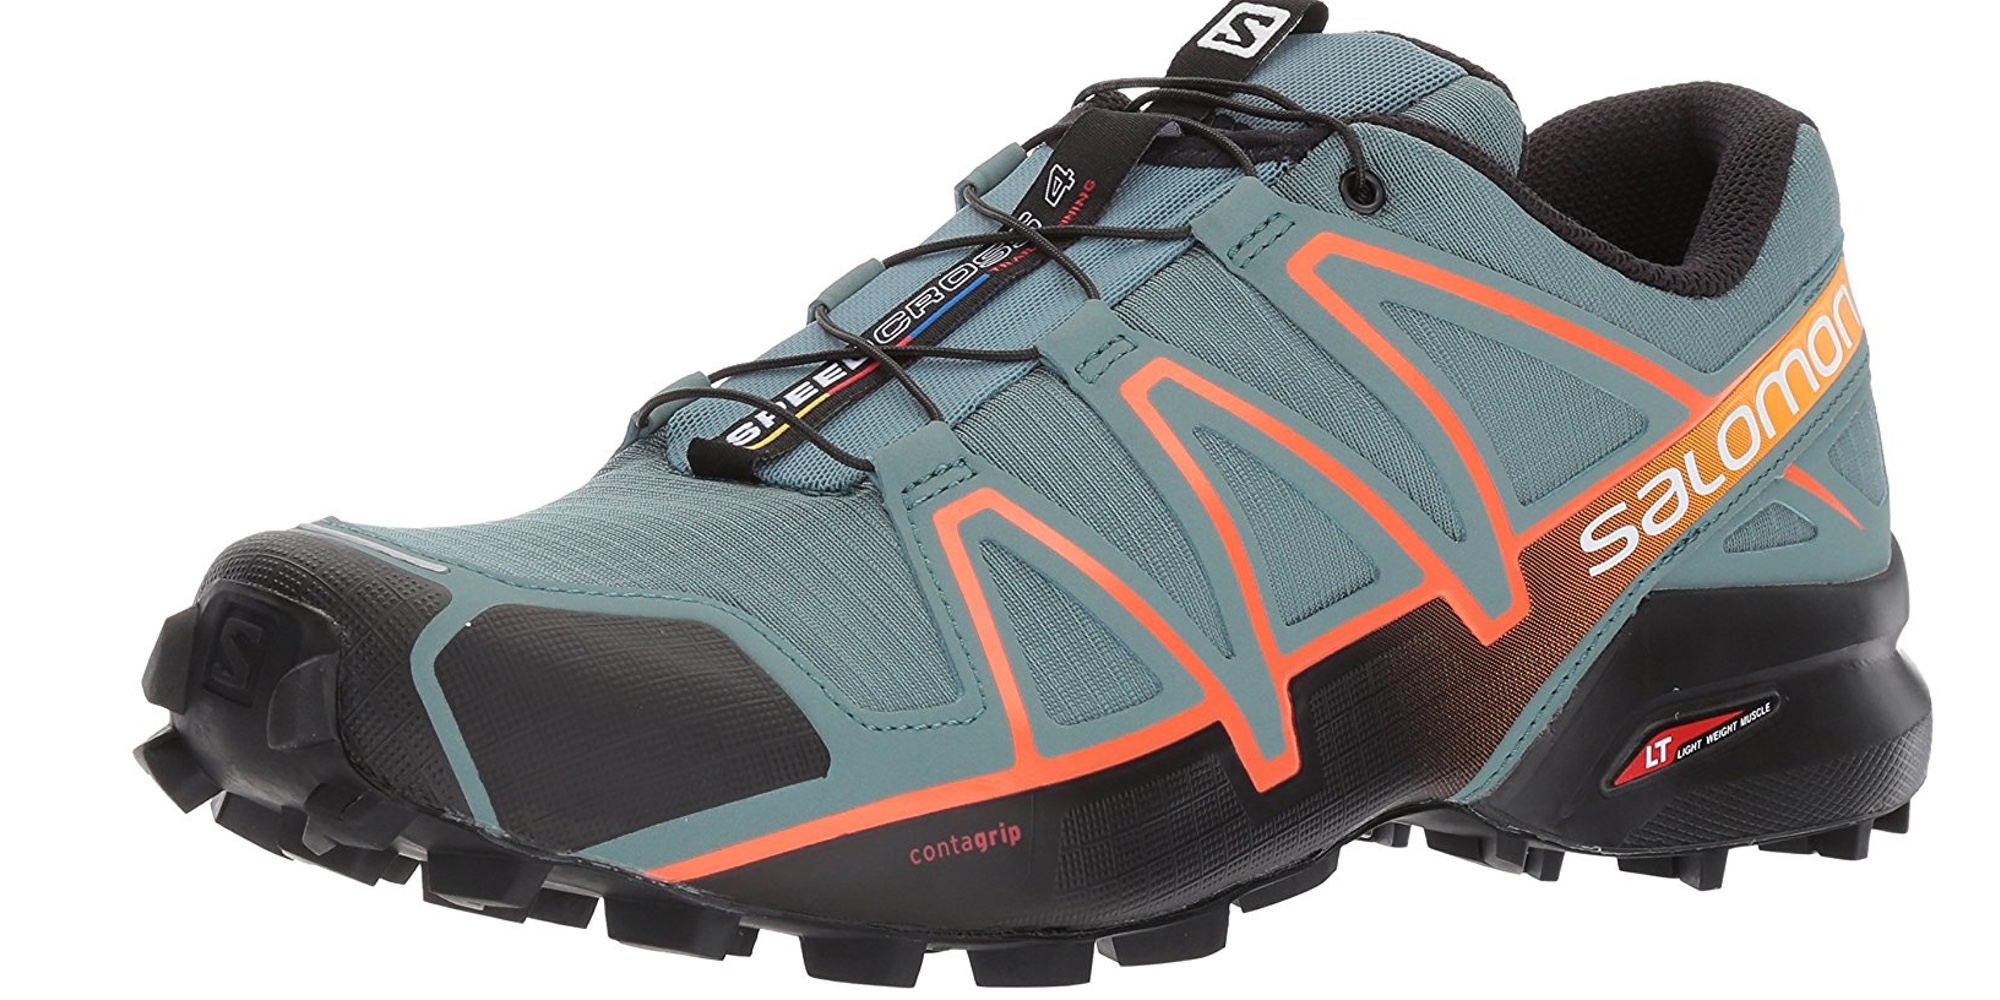 Save up to 40 off Salomon Shoes, Apparel and more at Amazon, today